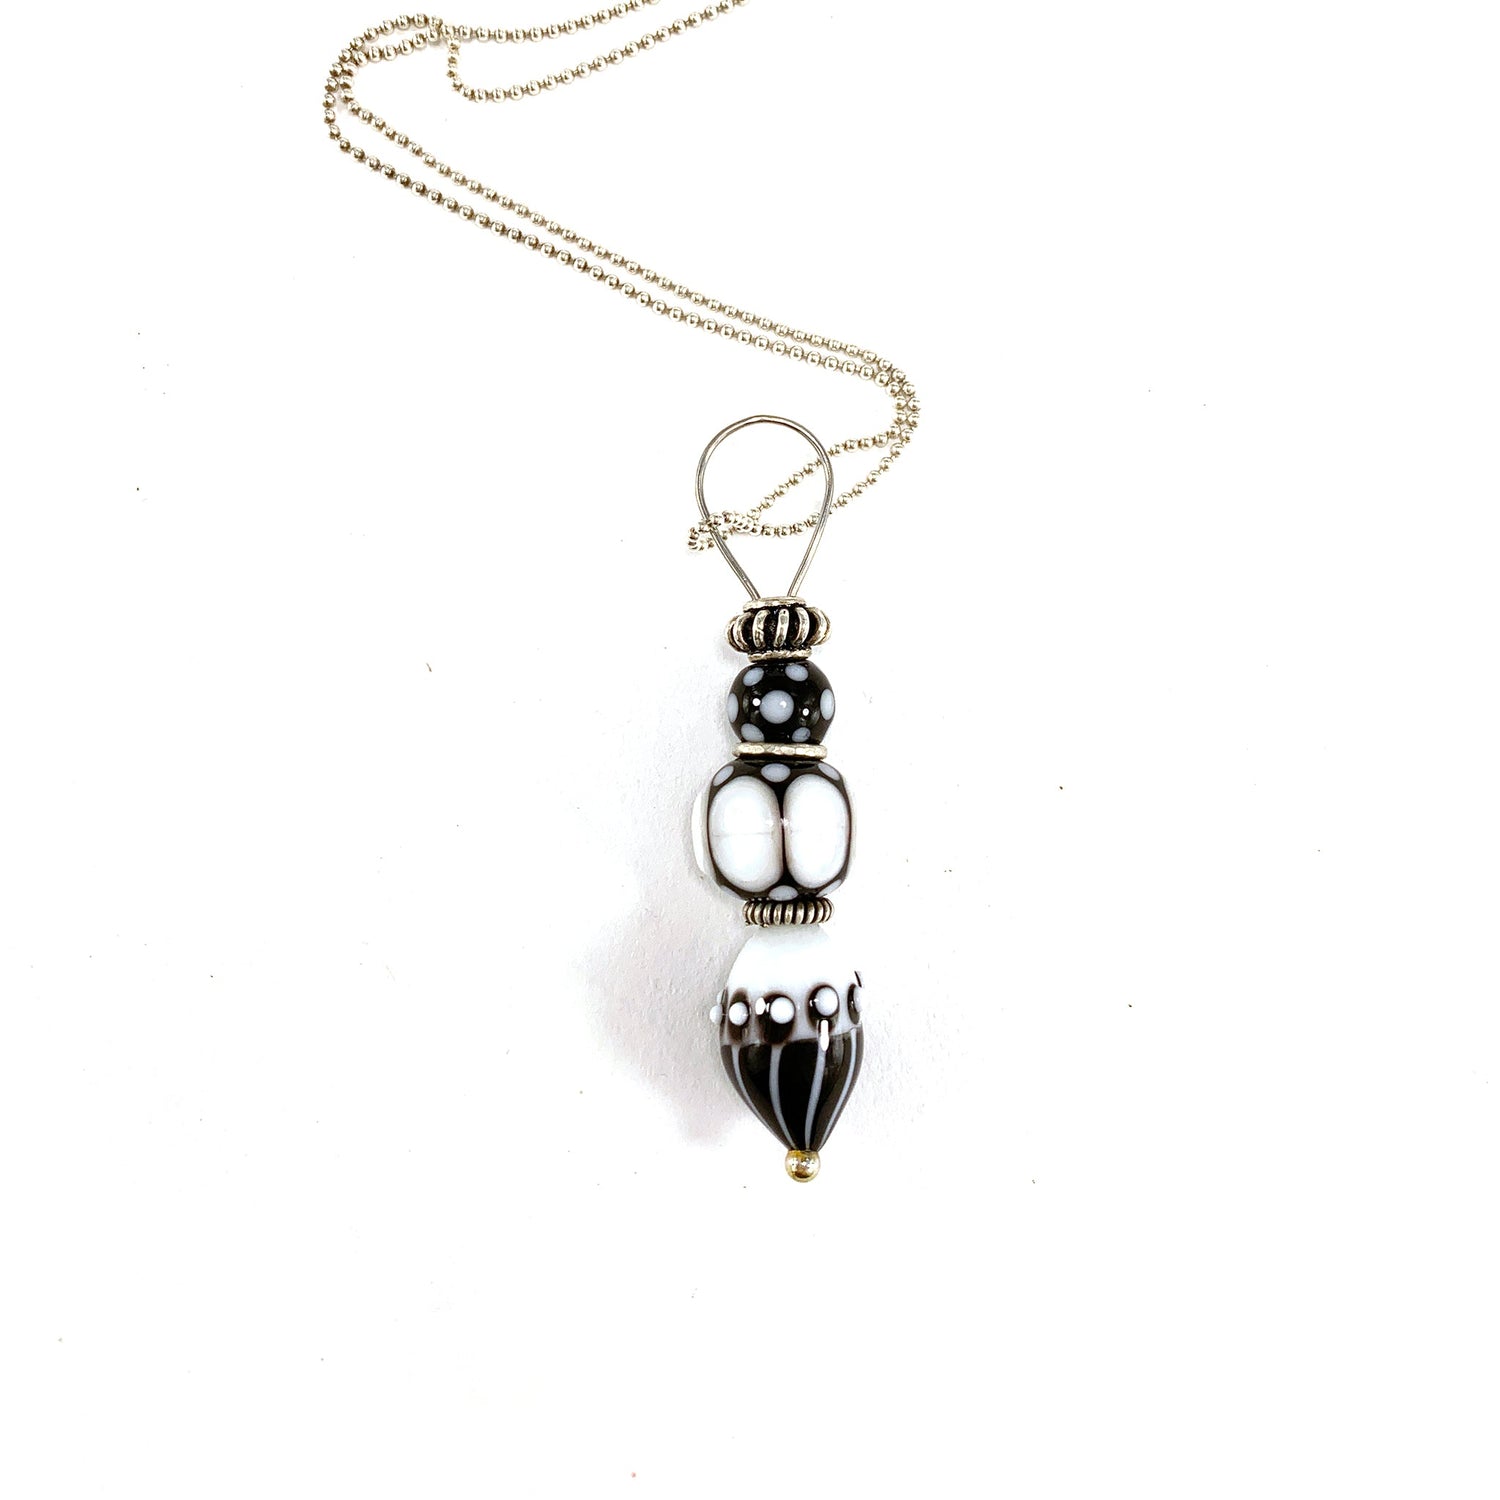 Stacked Bead Pendant in Black and White on a White background